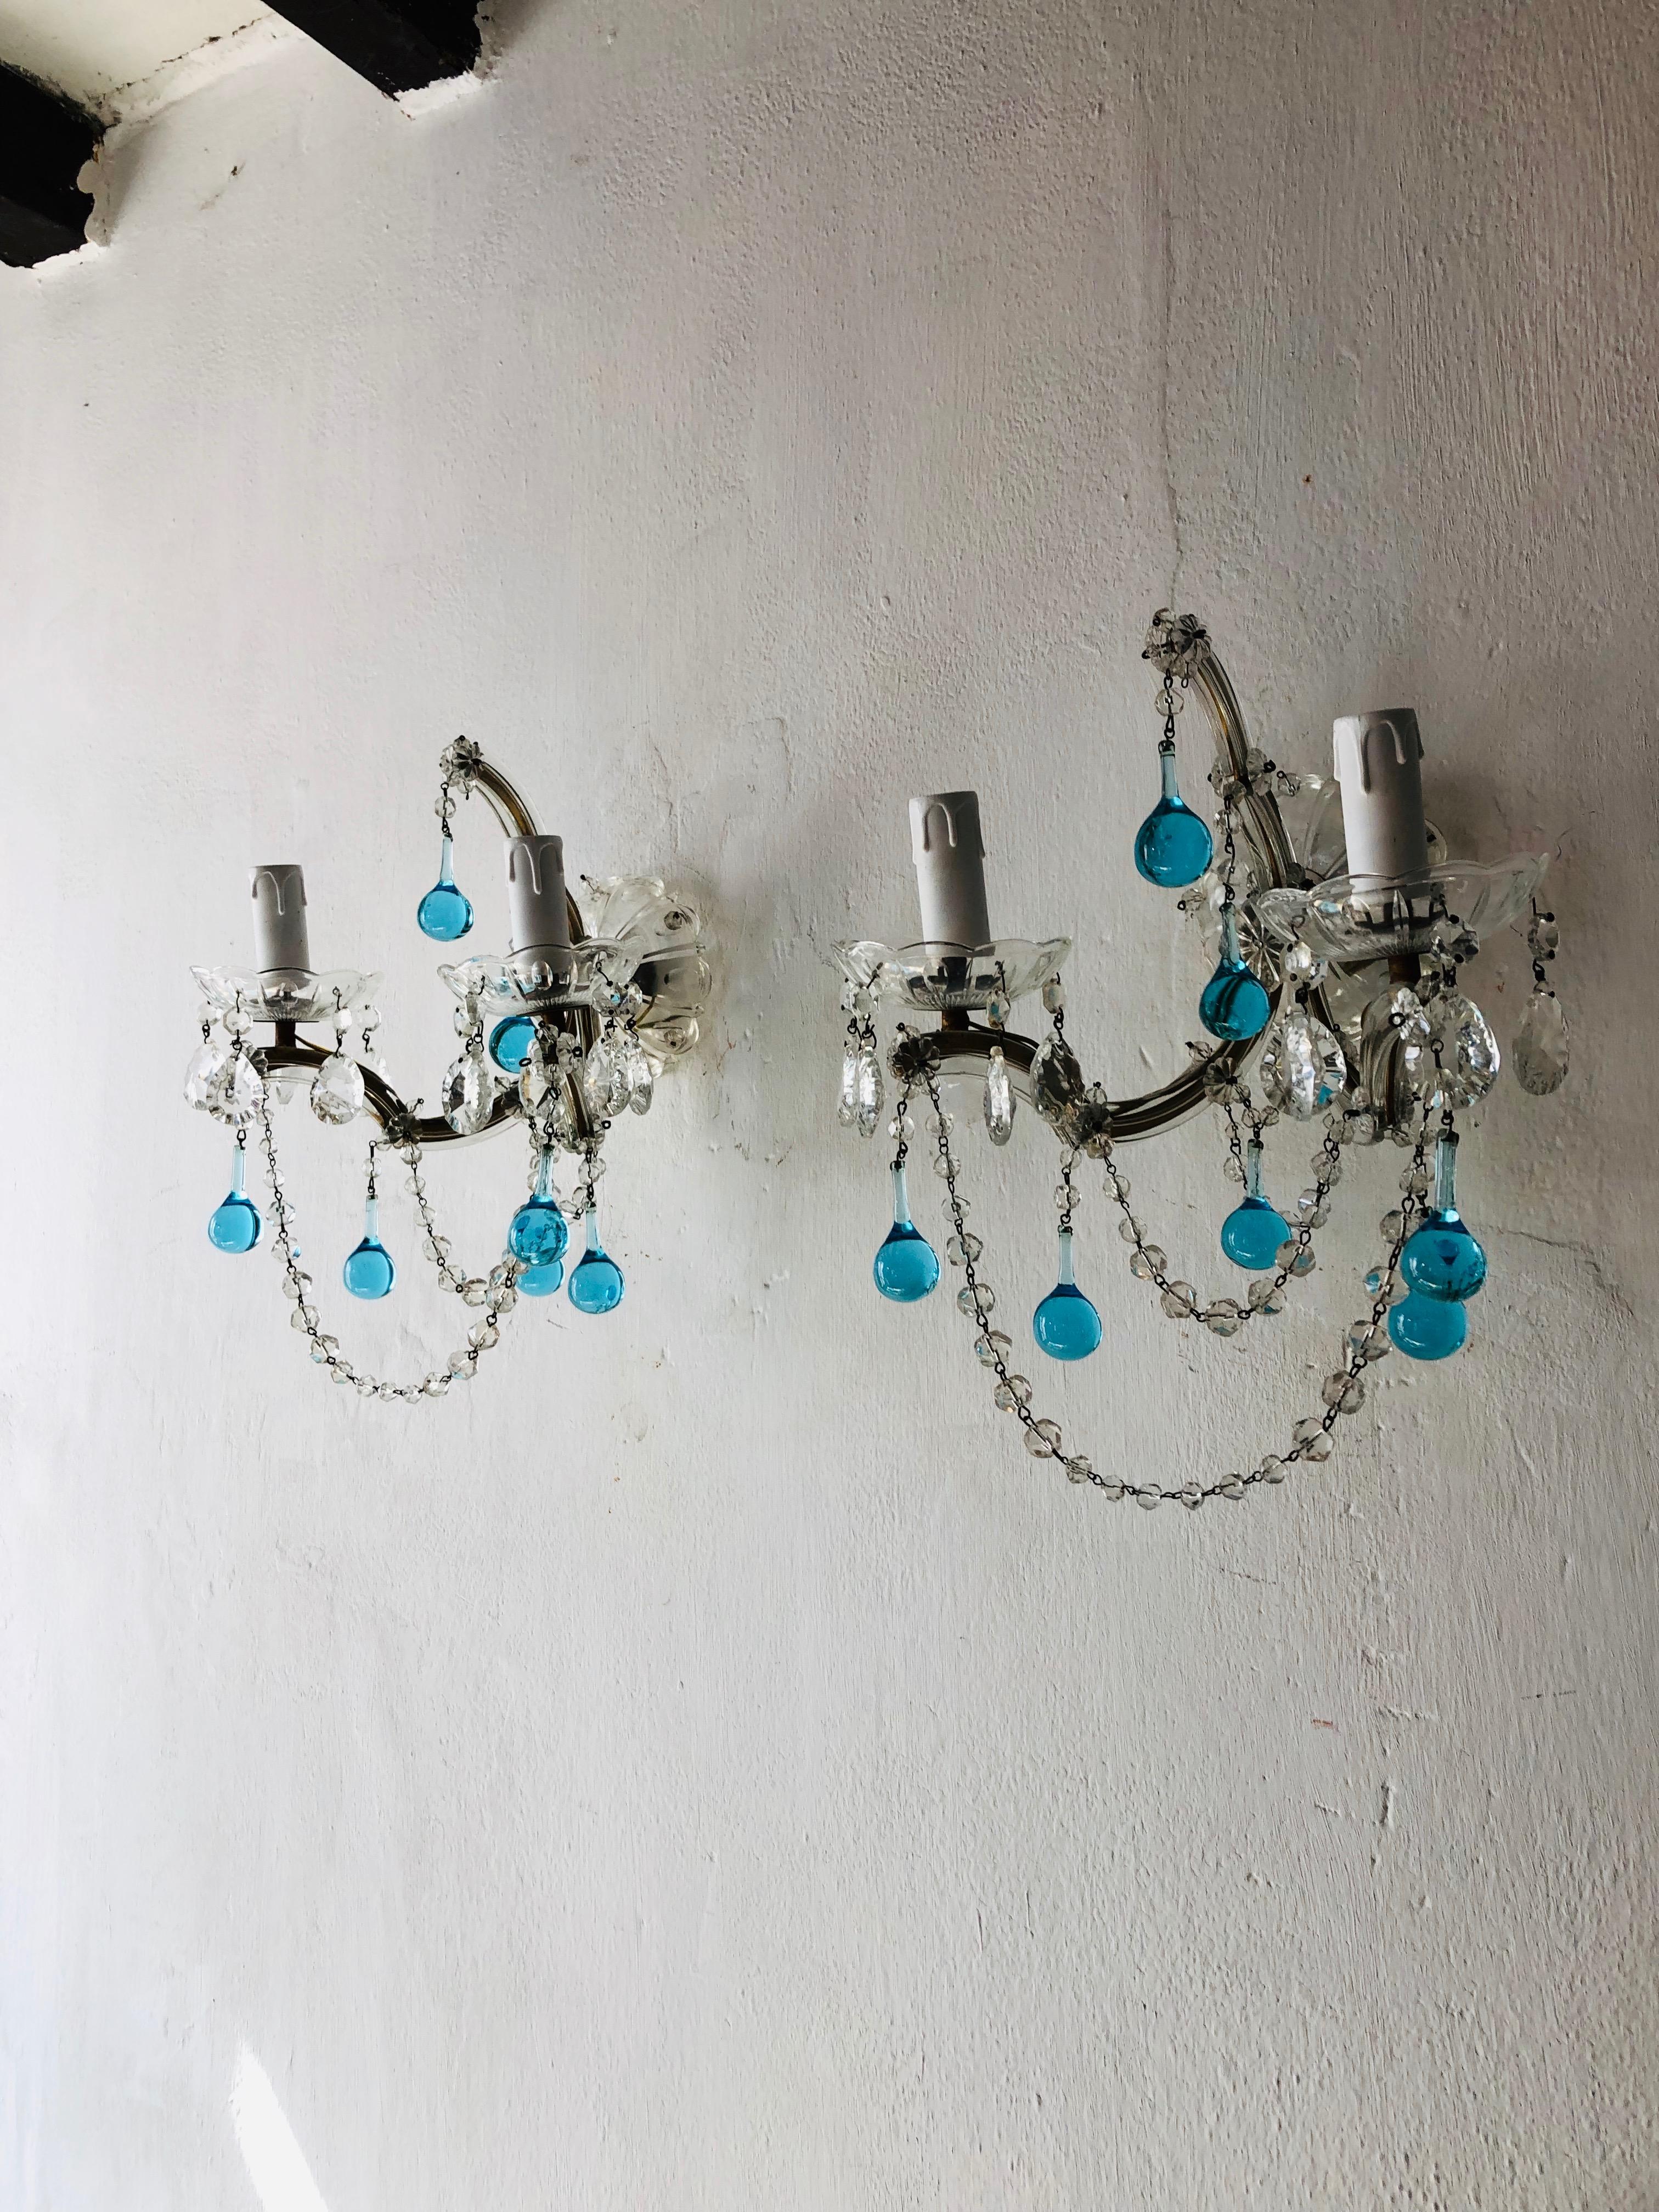 Re-wired and ready to hang! Housing two lights each, sitting in crystal bobeches dripping with vintage crystal prisms. Adorning Murano aqua drops, florets and crystal swags. Huge bobeche as back plate. Free priority shipping from Italy.